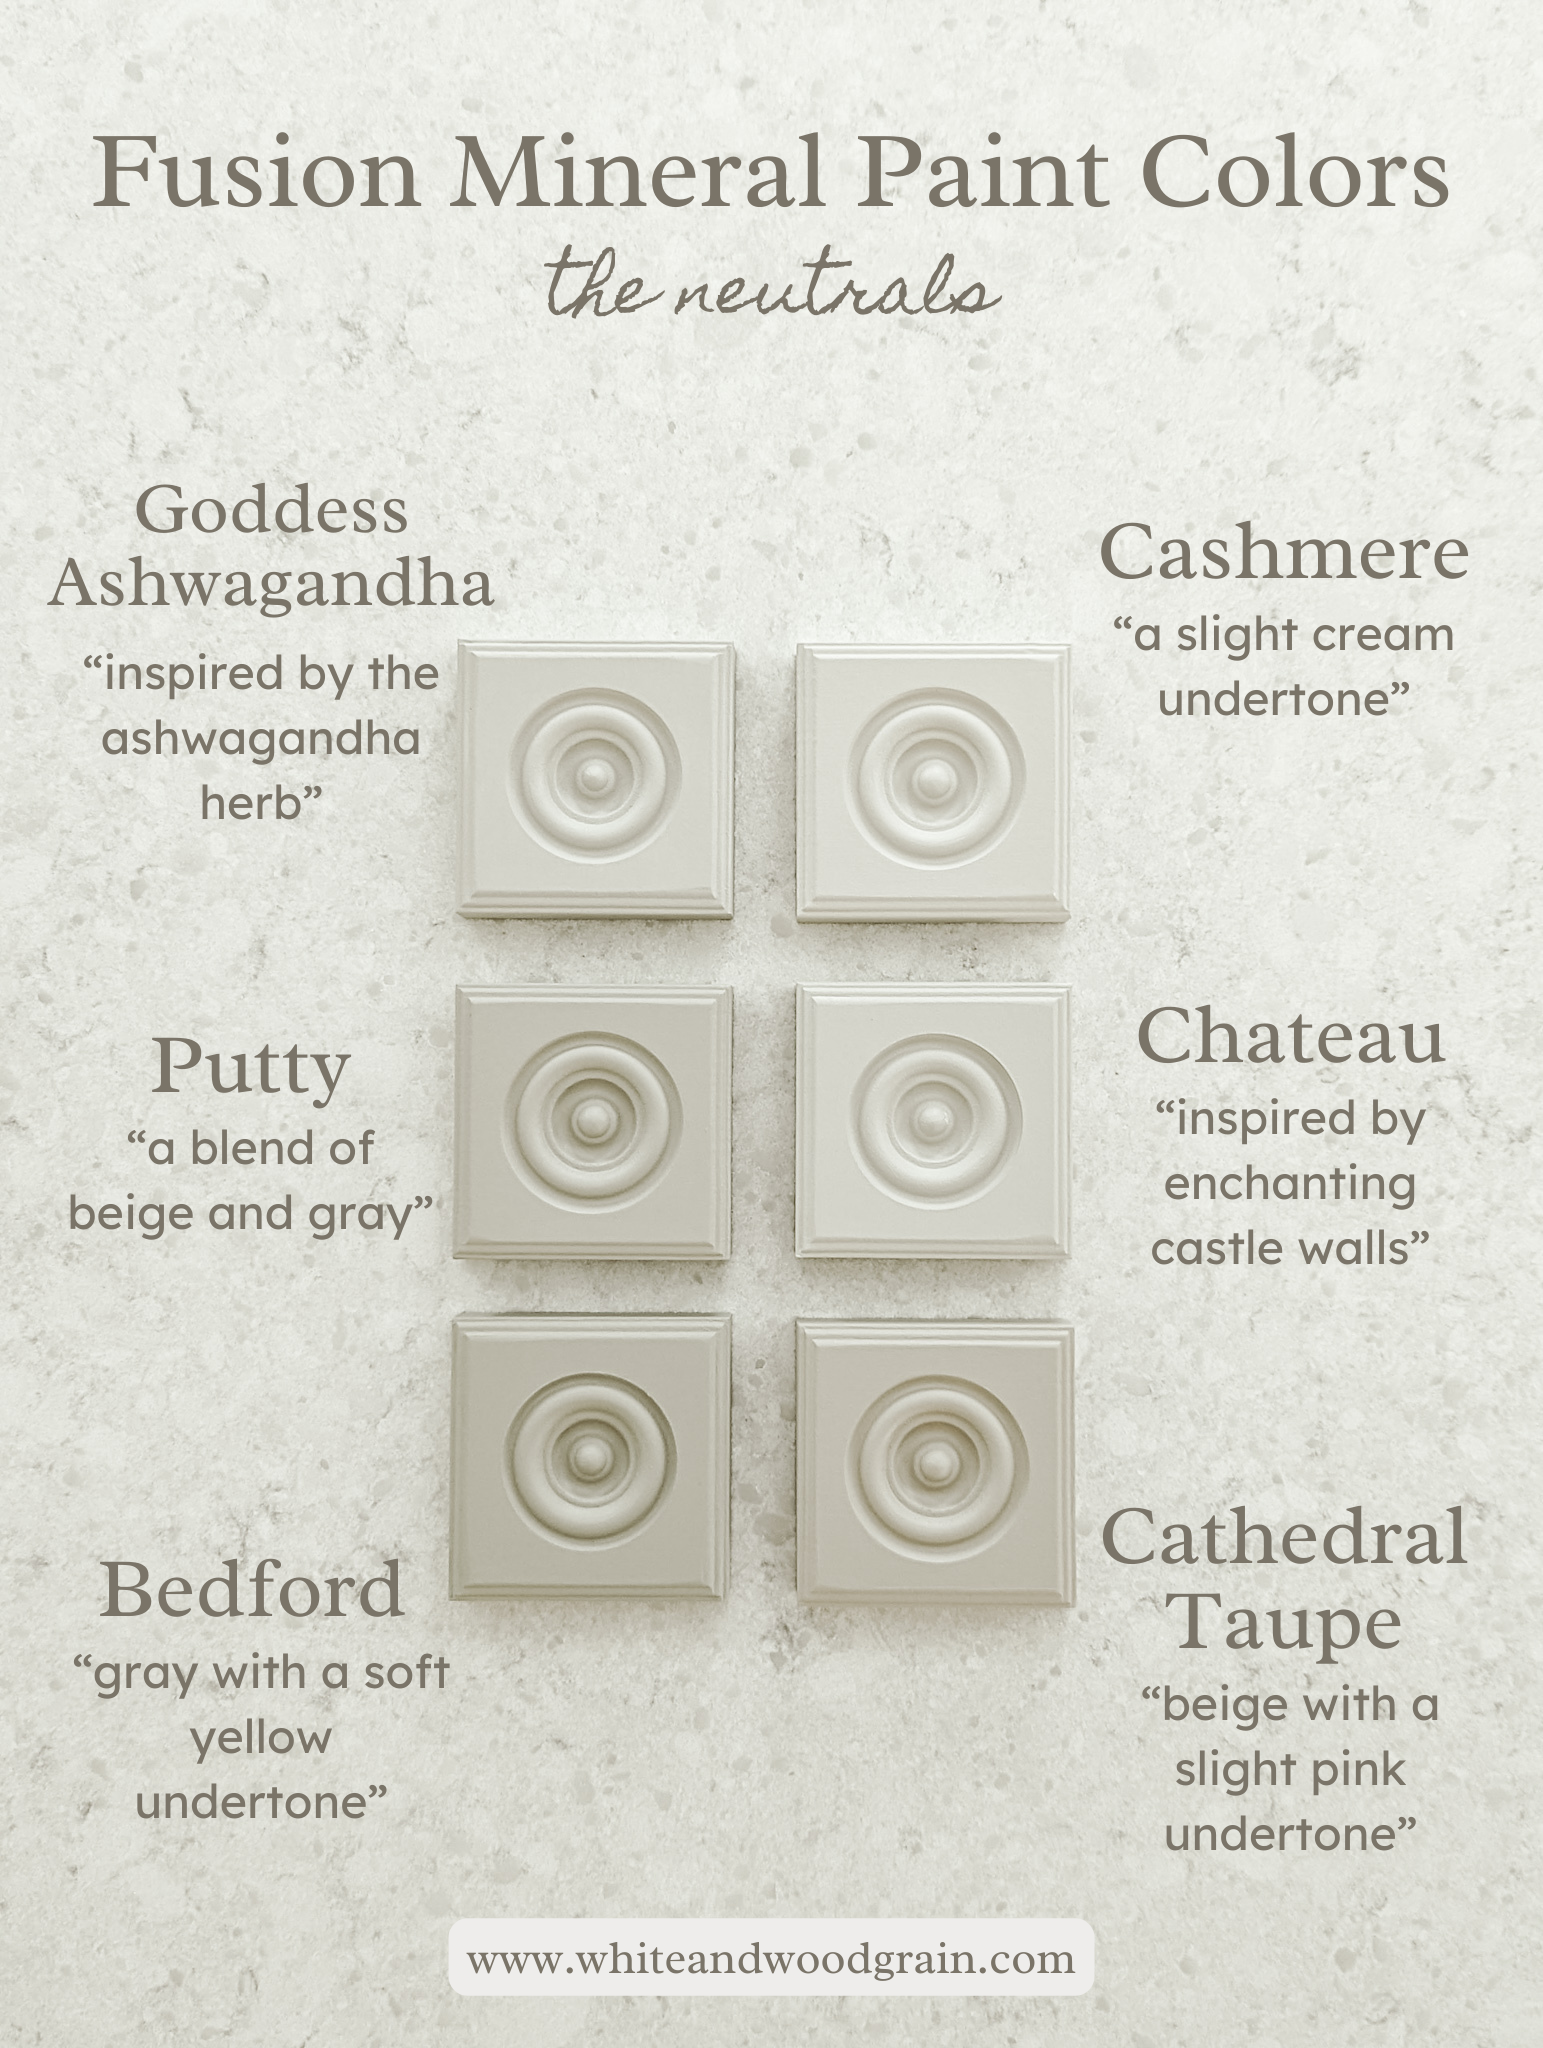 a color comparison of all the neutrals from Fusion Mineral Paint including Putty, goddess ashwagandha, cashmere, chateau, bedford, and cathedral taupe,